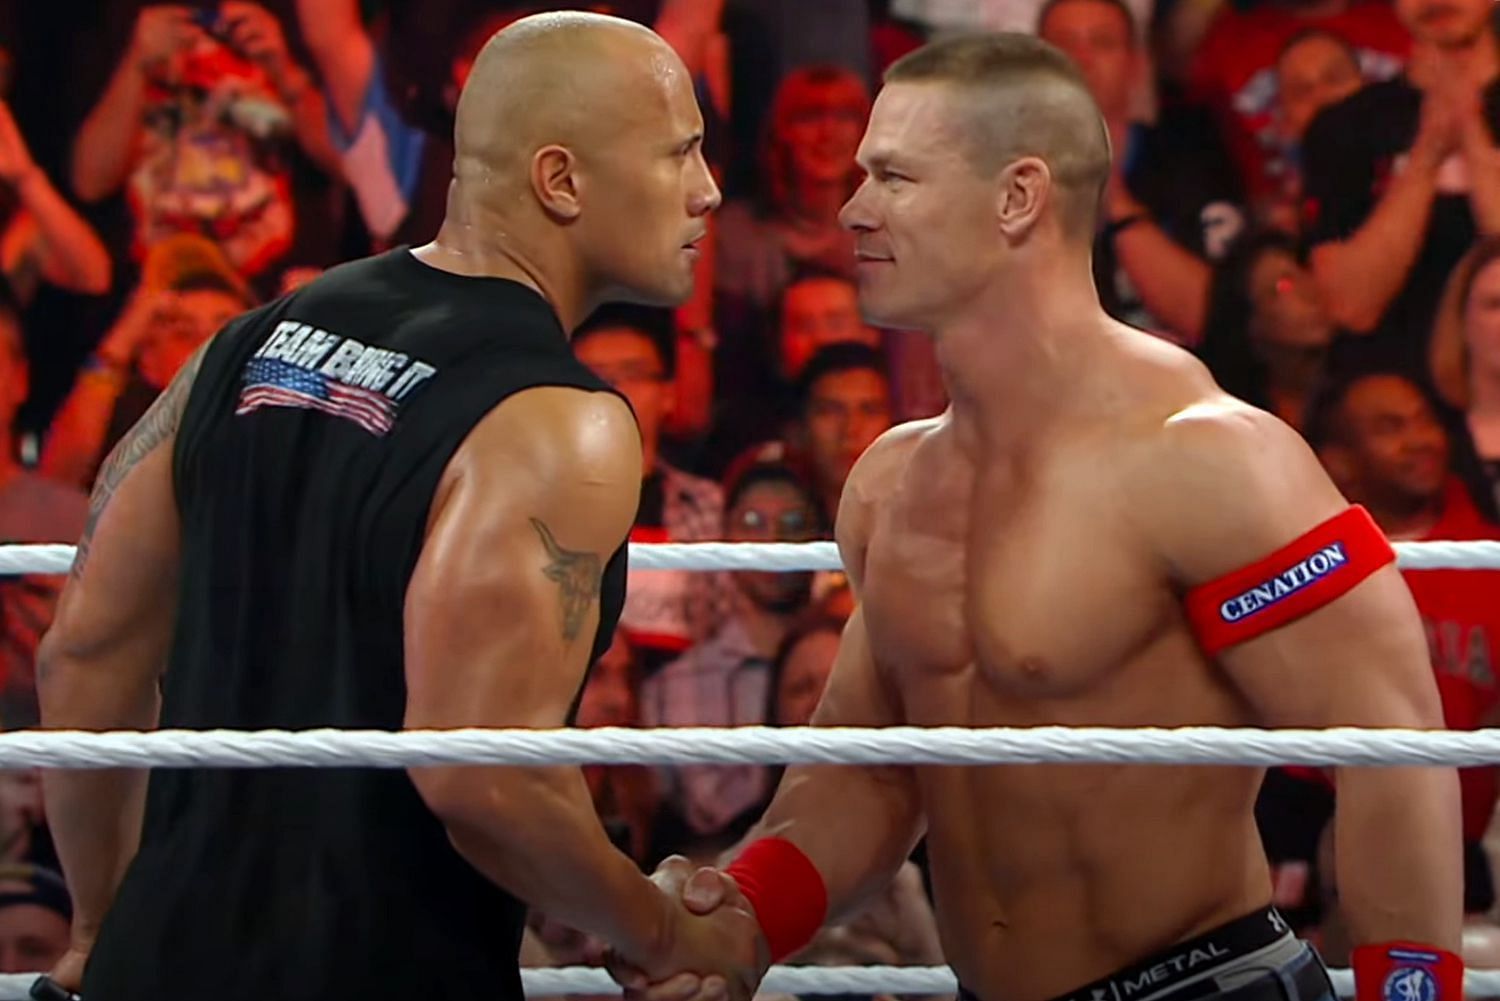 The Rock and John Cena building up to WrestleMania 28